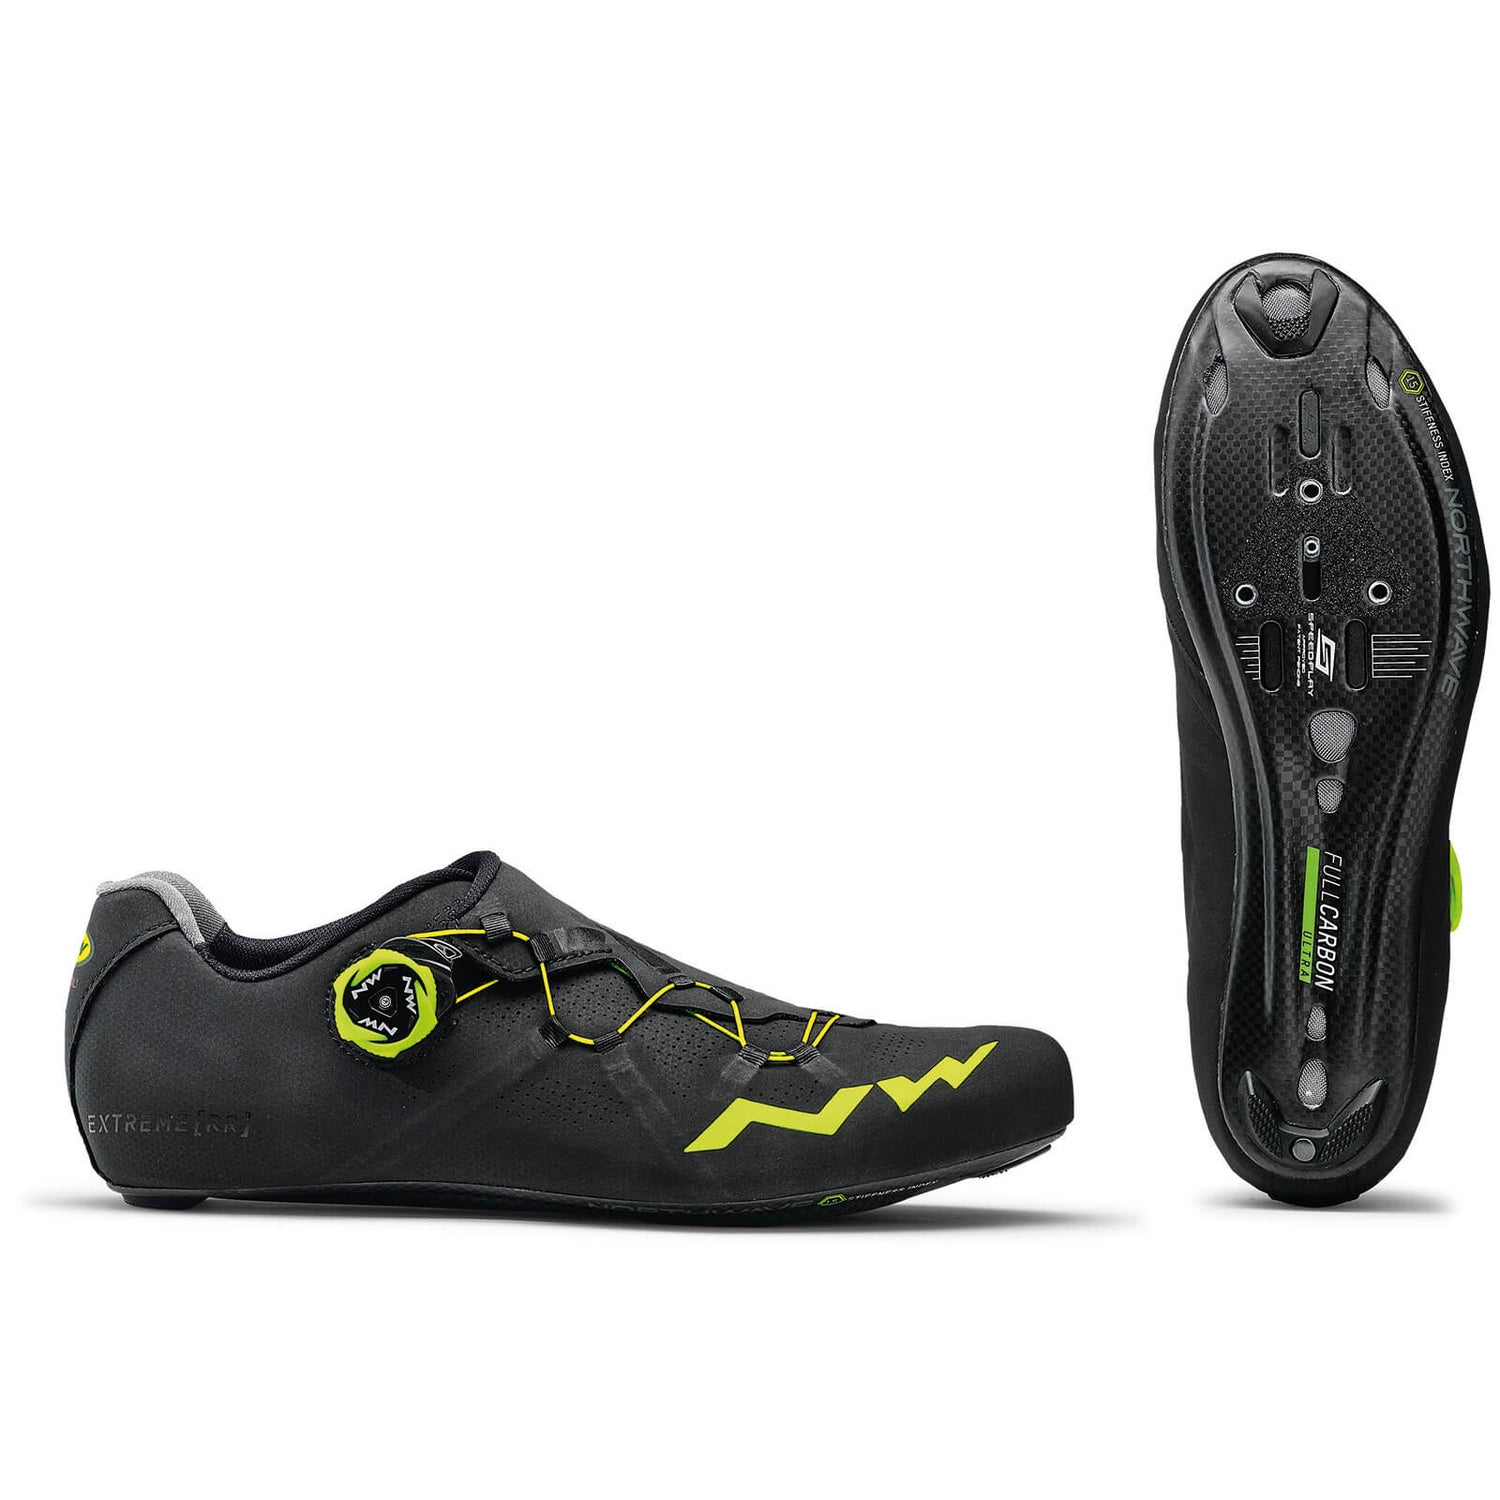 Northwave Extreme RR Cycling Shoes - Black | ProBikeKit.com